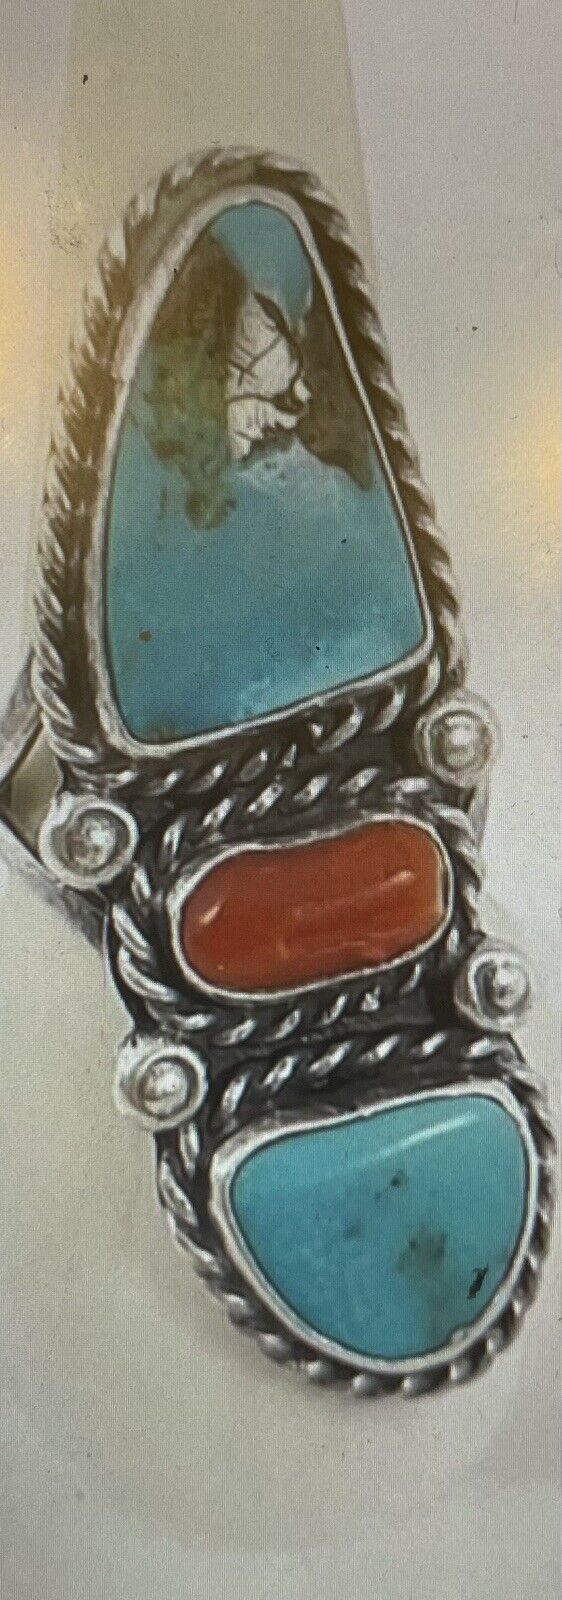 Vintage 925 Silver Turquoise & Red Coral Ring Size 9 Southwest Style Weight 11.7